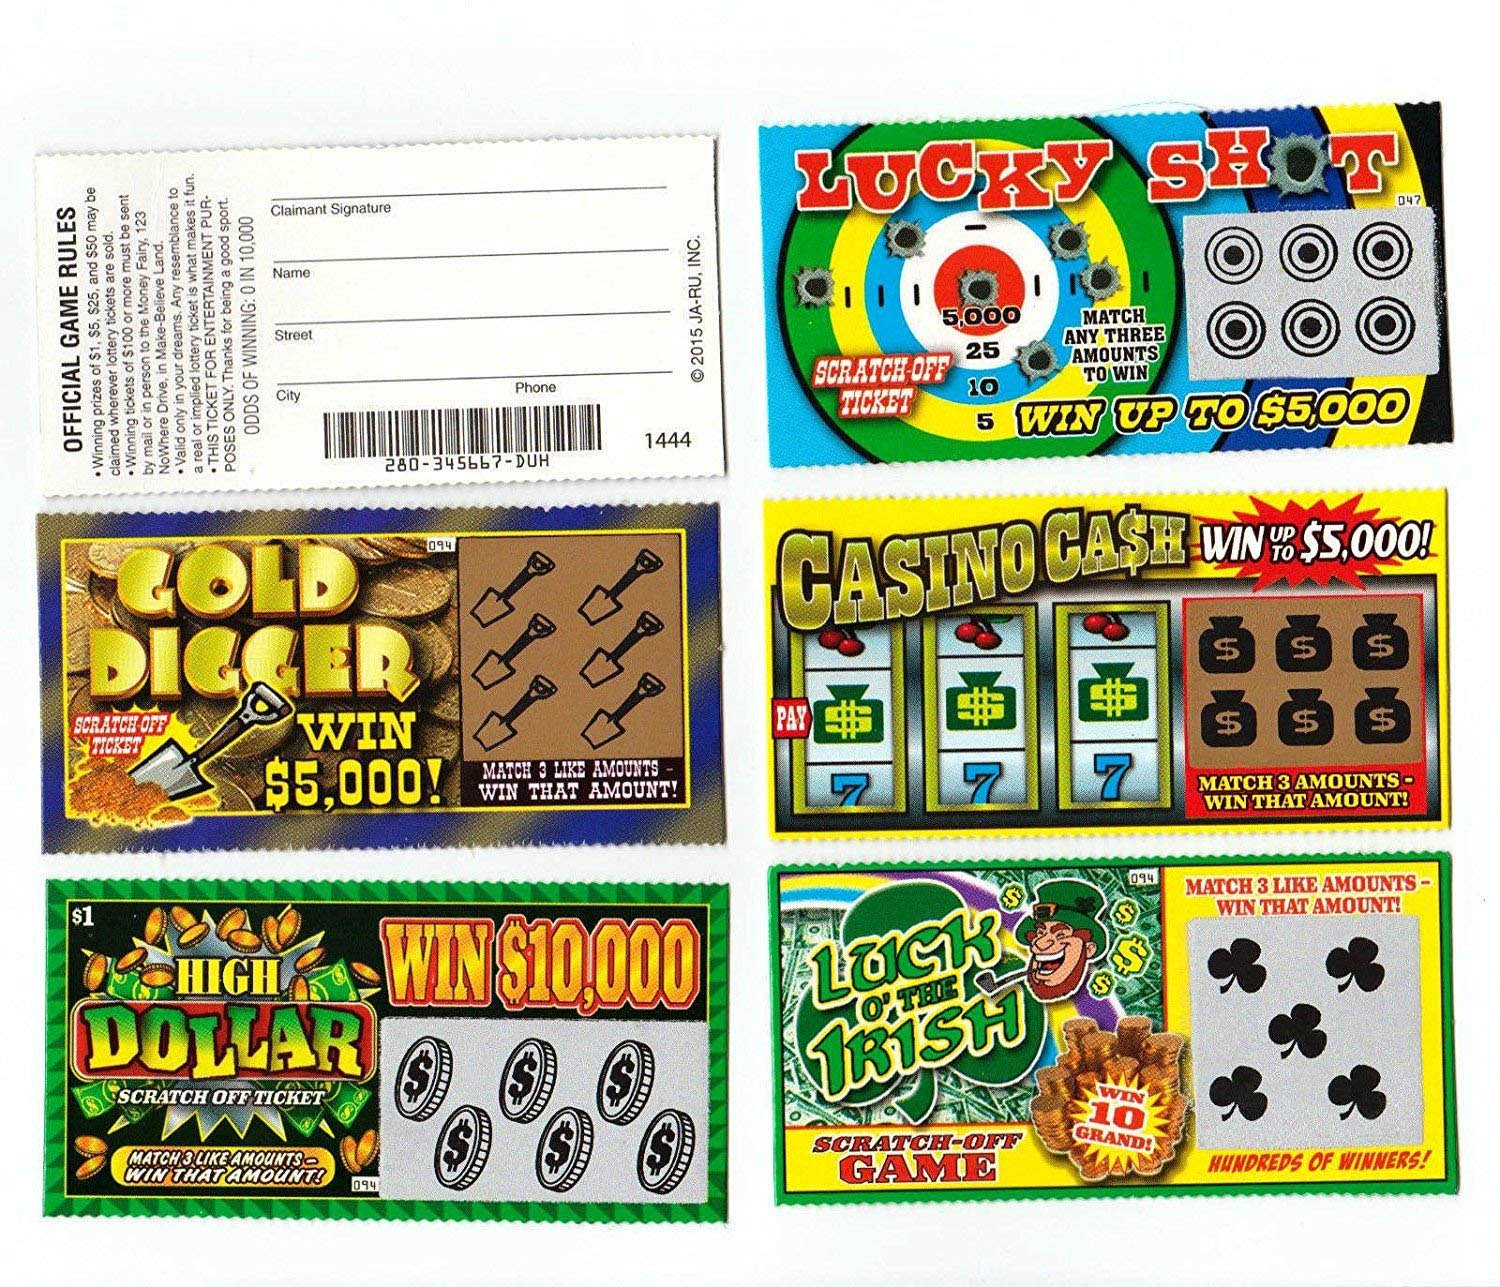 scratch off lottery tickets - Locet Set Official Game Rules Mns som Por Entertainment Pur e ngert Oods Of Winning Din 10 000 Poses On 2015 Jahru, Inc Noun Amounts Scratch Opf 25 Mont 5 Win Up To $5,000 1444 W Casino Case Win 55.000! sss $5,000! Vieta Wen 